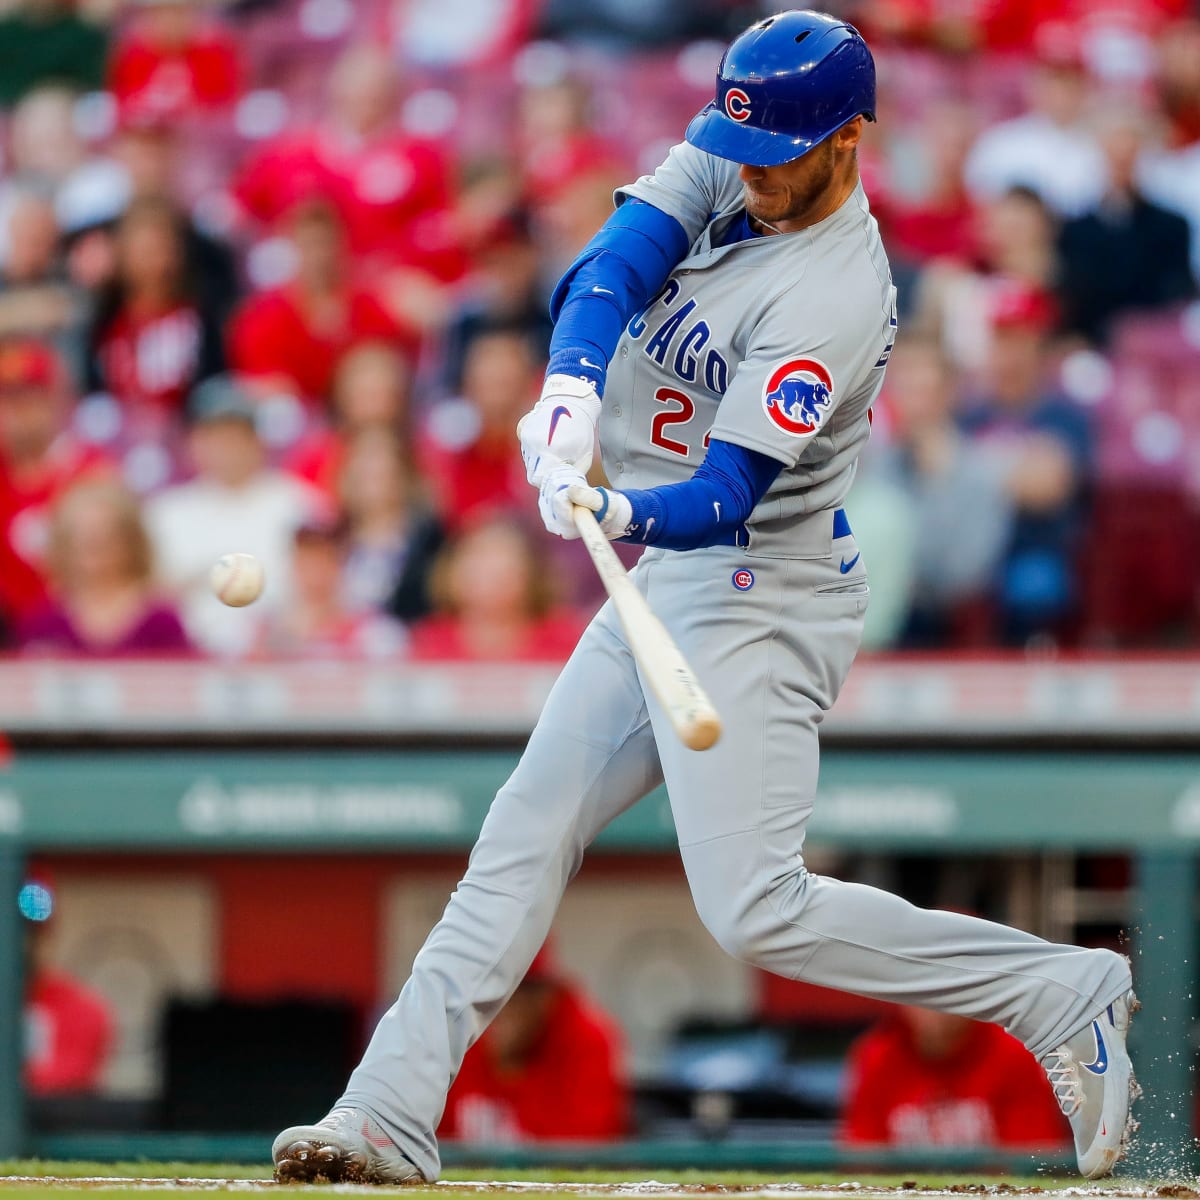 A Cody Bellinger Trade Could Have Been HUGE for the Cubs